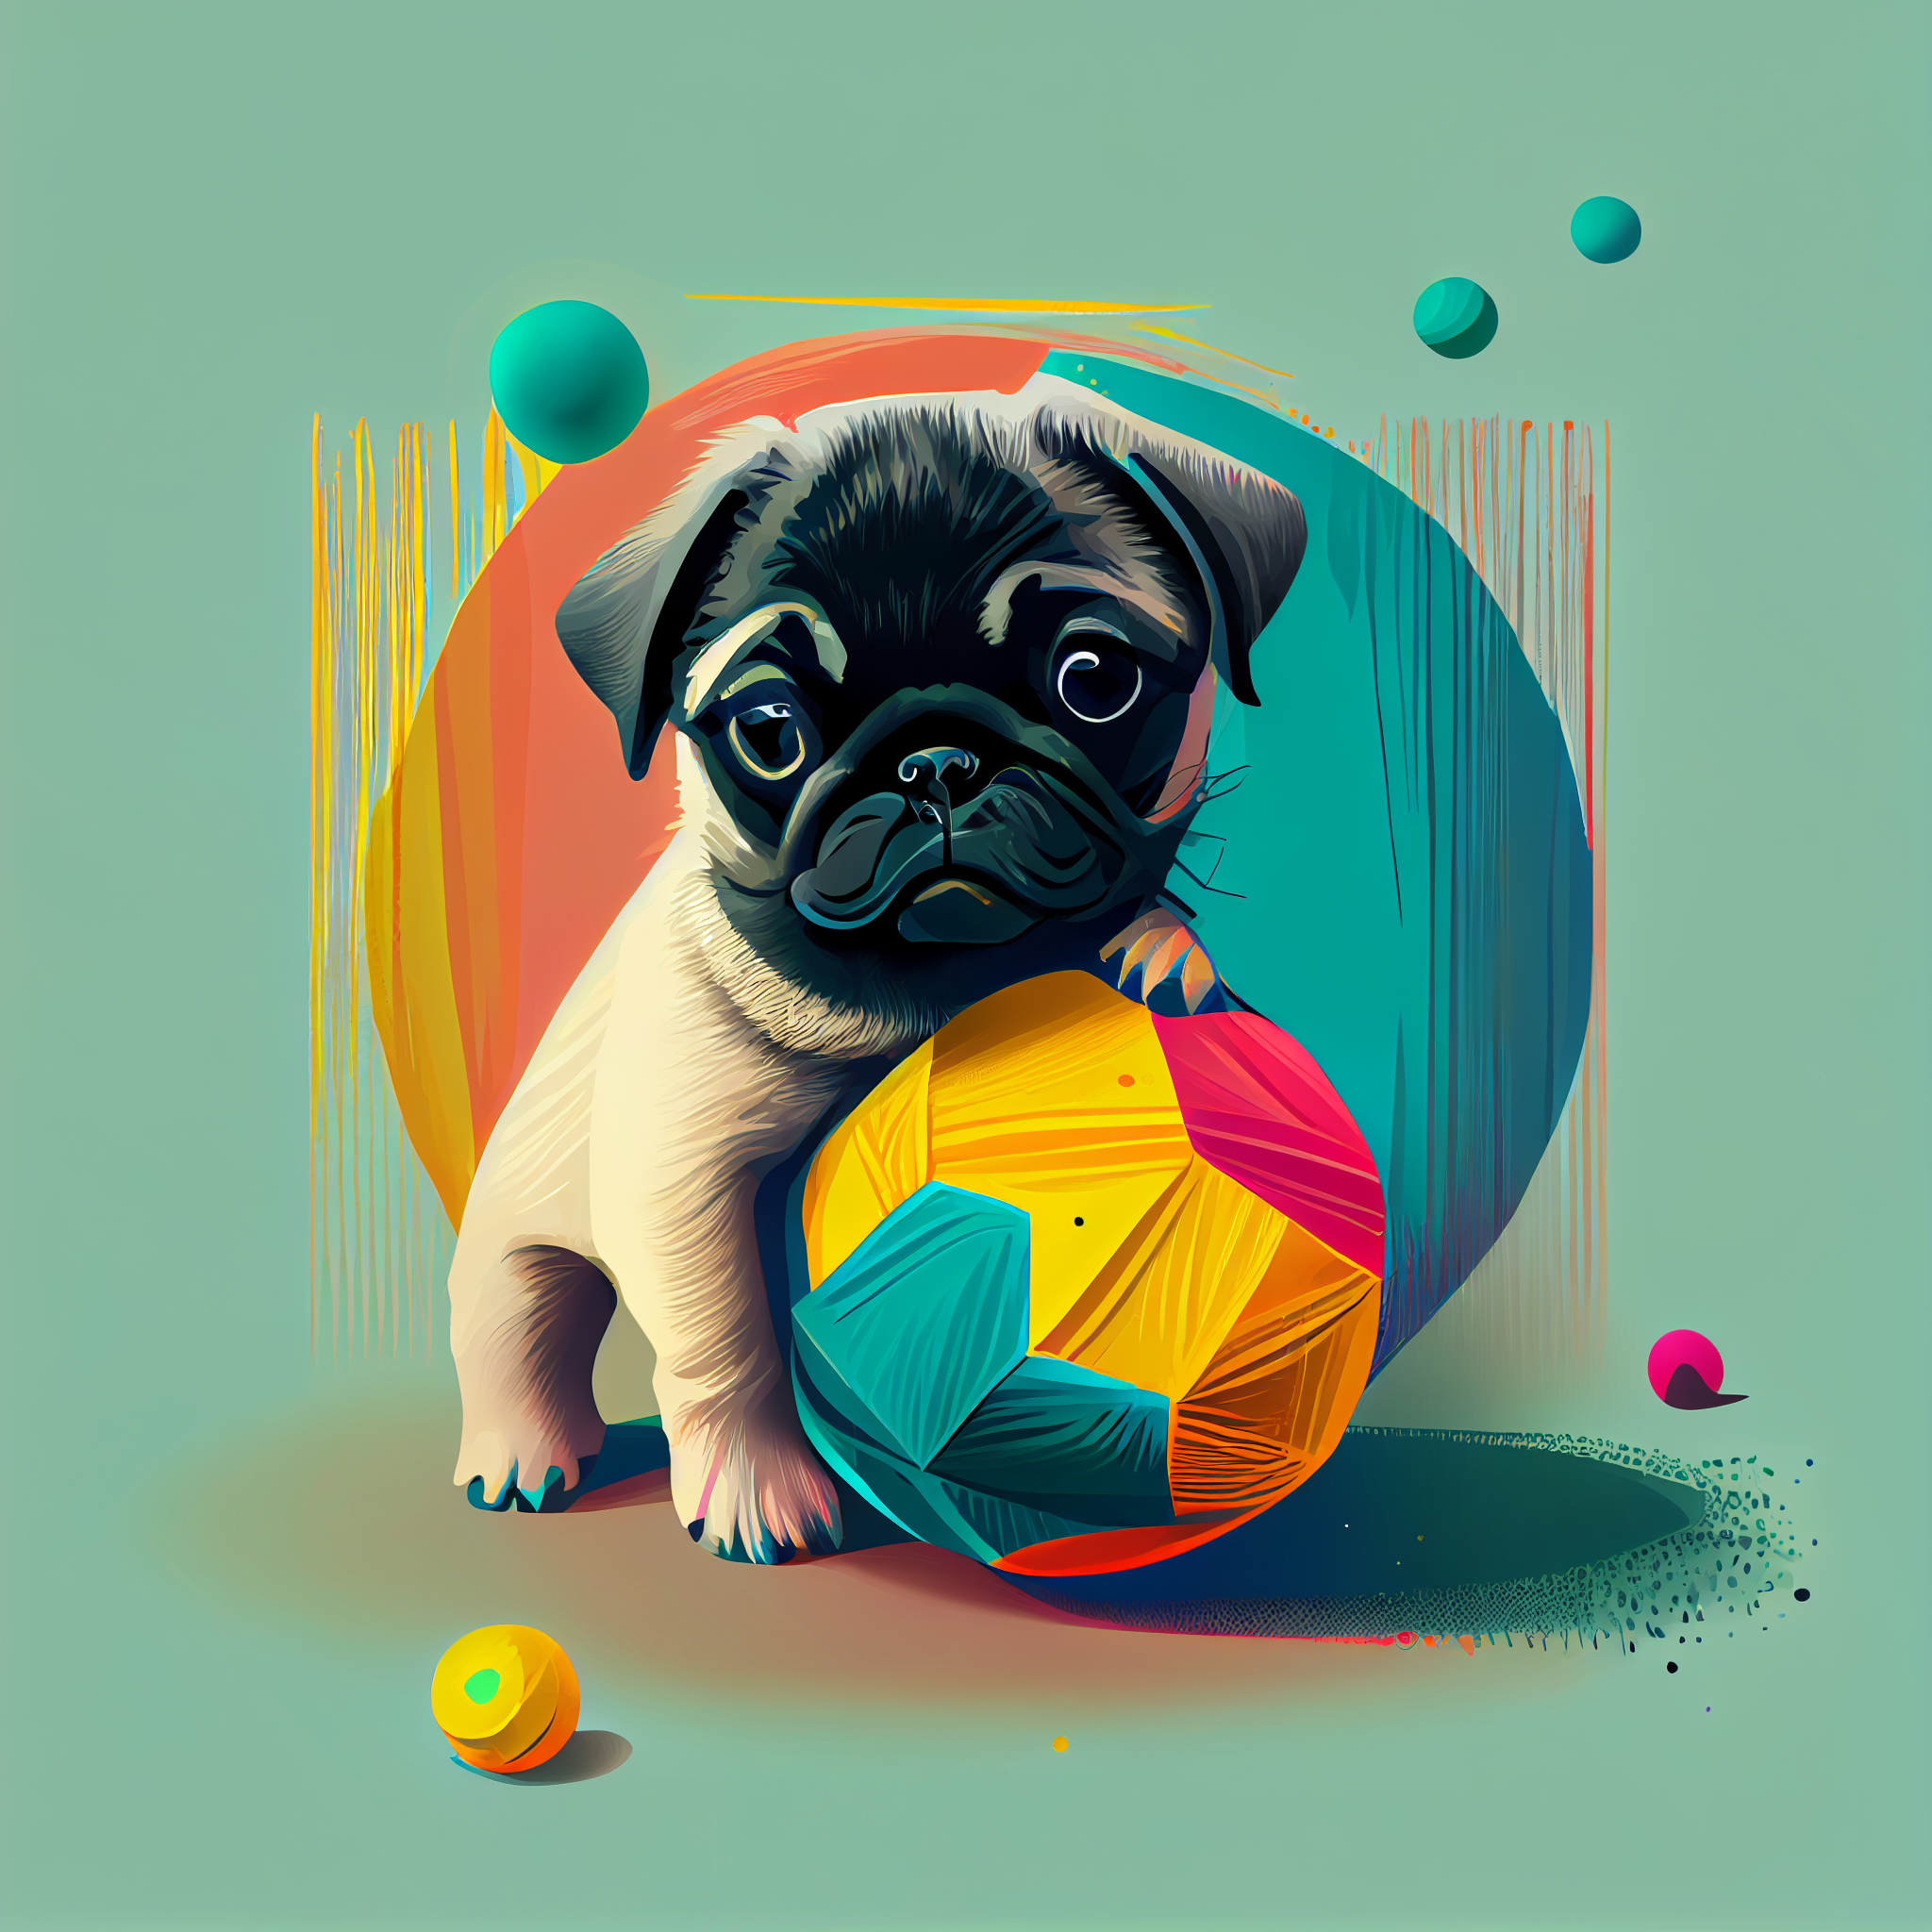 Playful Pug: Abstract Art Print of an Adorable Puppy with Ball